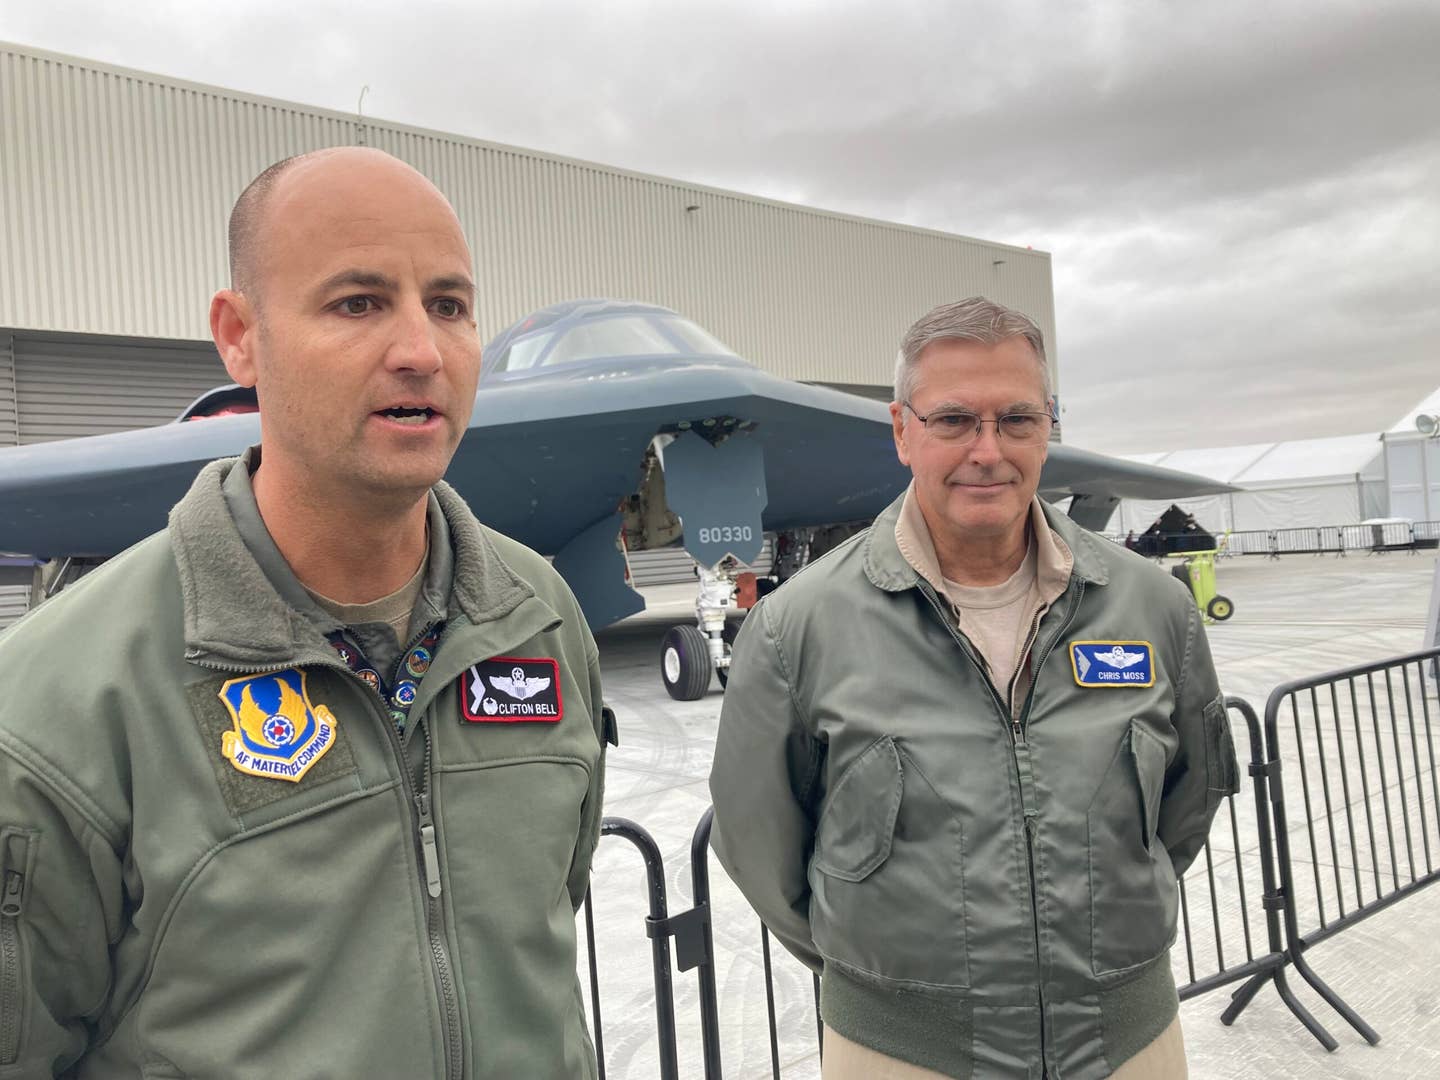 Air Force Lt. Col. Clifton Bell (l) and Northrop Grumman test pilot Chris Moss, scheduled to be the first to fly the B-21 Raider, talked about the mission at Northrop Grumman's Plant 42 in Palmdale, California hours before the unveiling of the Raider. (Howard Altman, The War Zone photo)